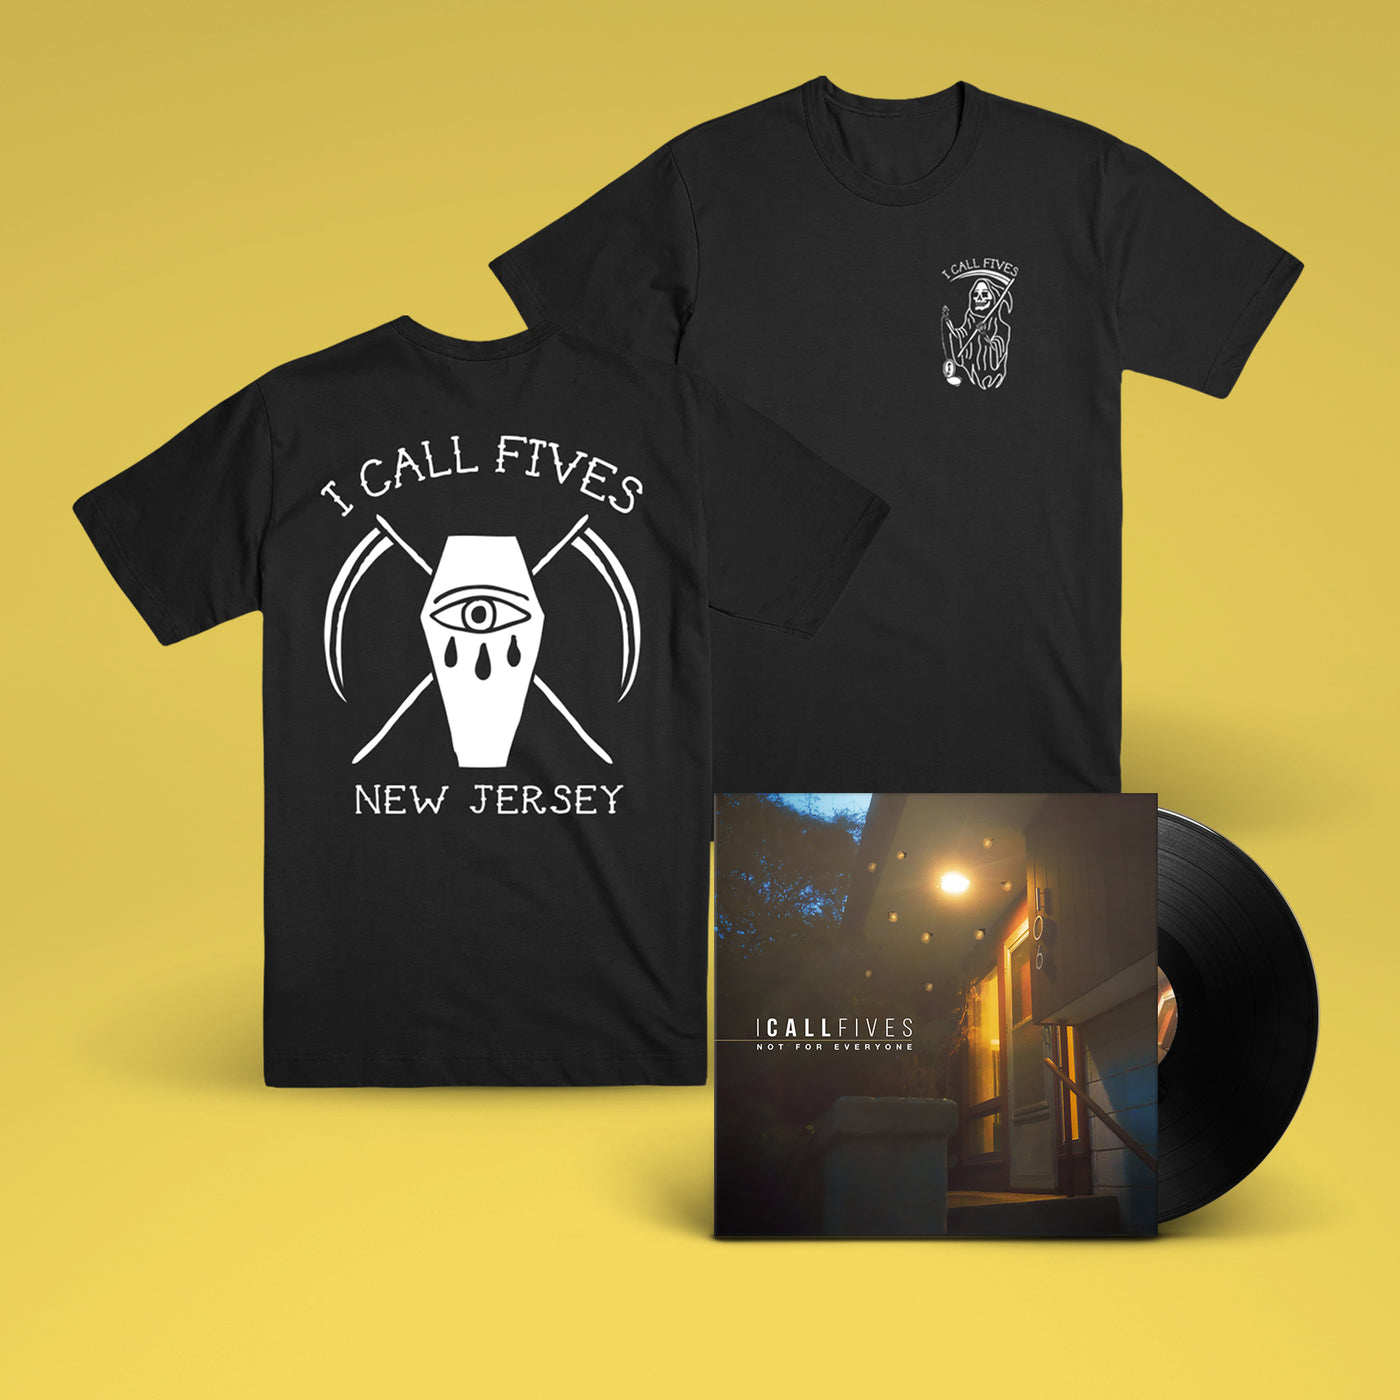 I Call Fives - Not For Everyone LP + Shirt